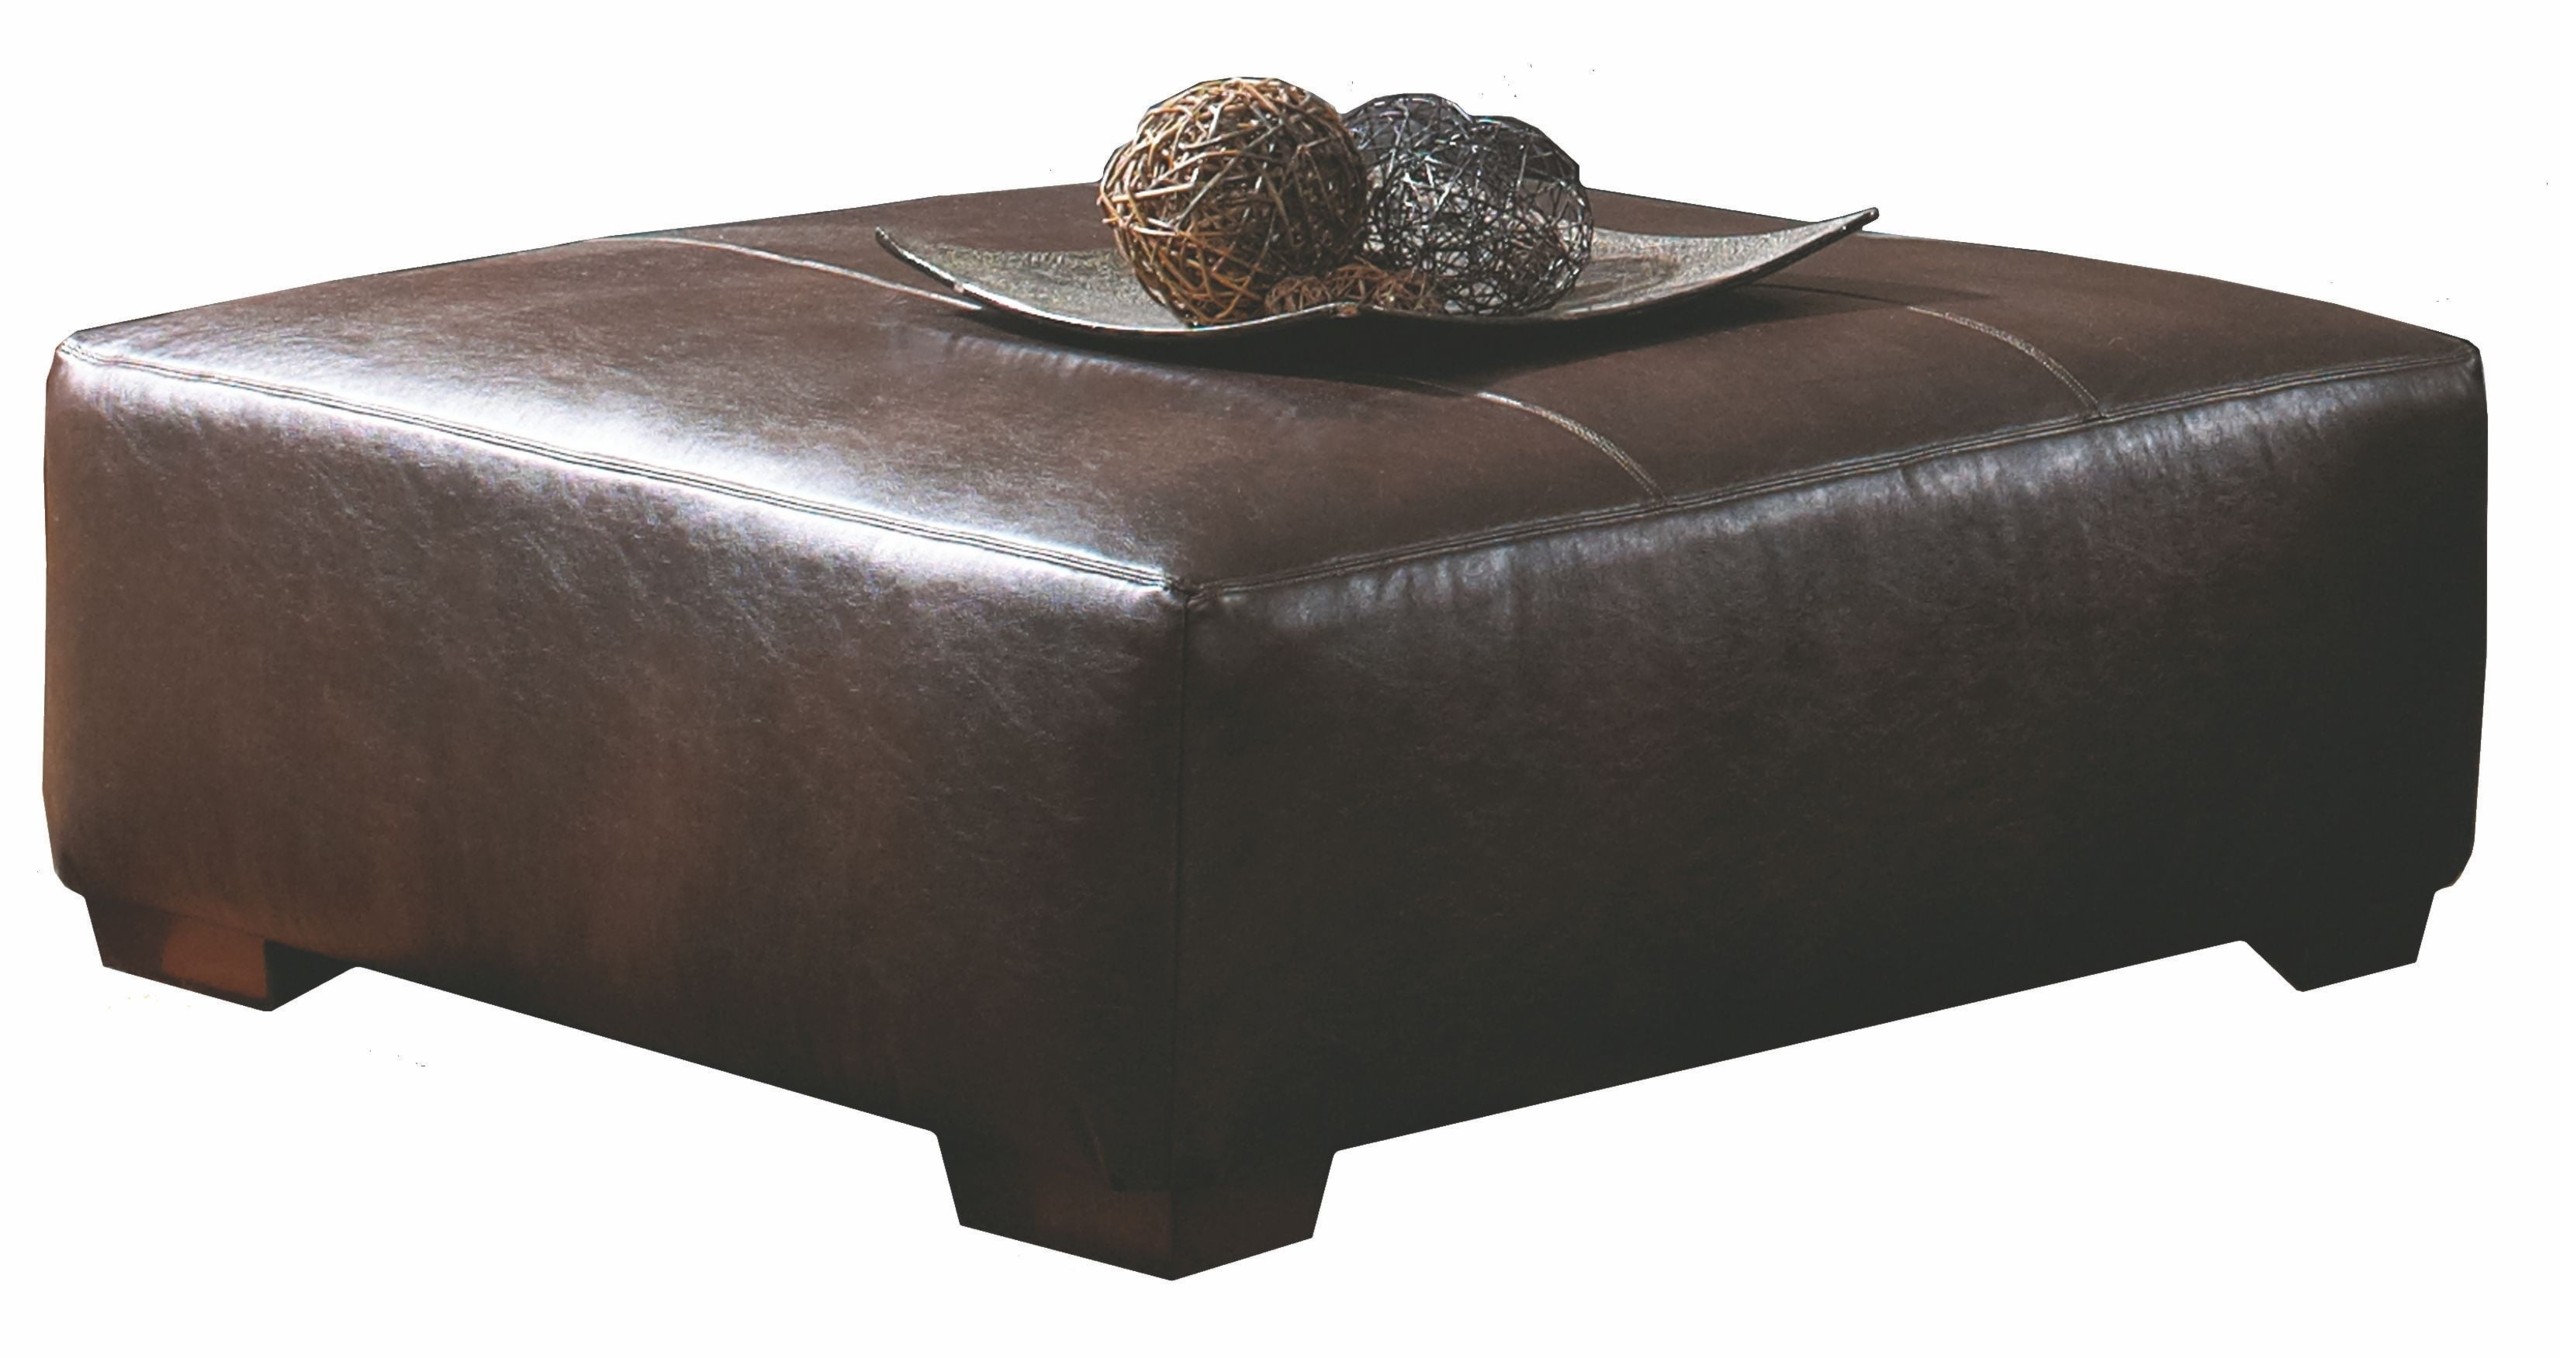 Lawson extra large cocktail ottoman